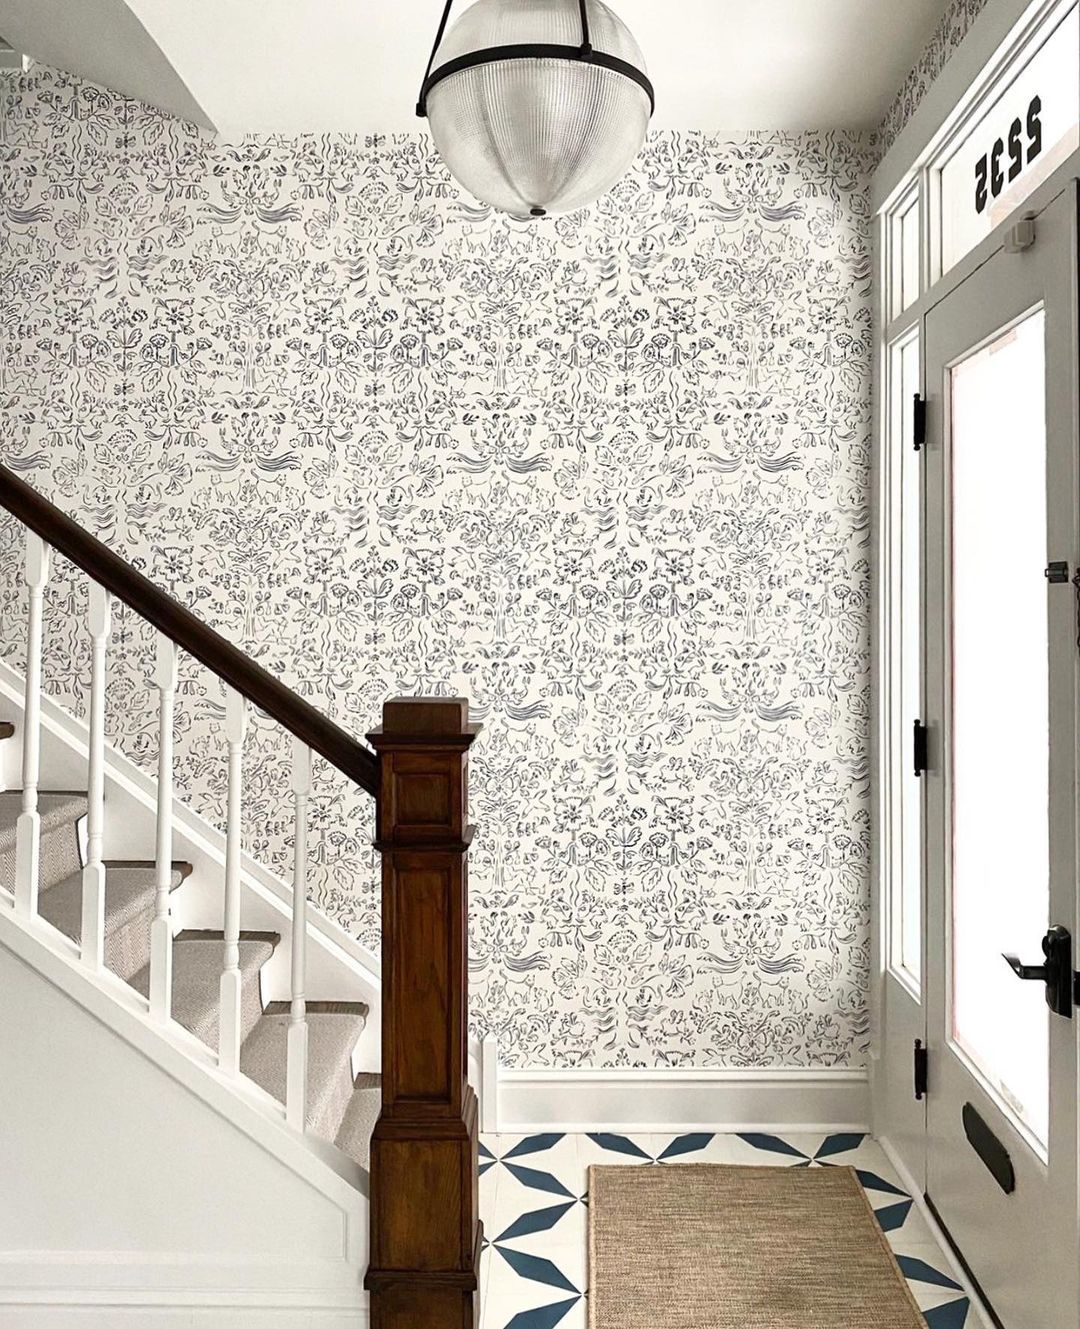 Storyline (Delft Blue) wallpaper in an entry and stairwell, hung by installer First Floor Chicago and designed by Sarah Montgomery Deisgn